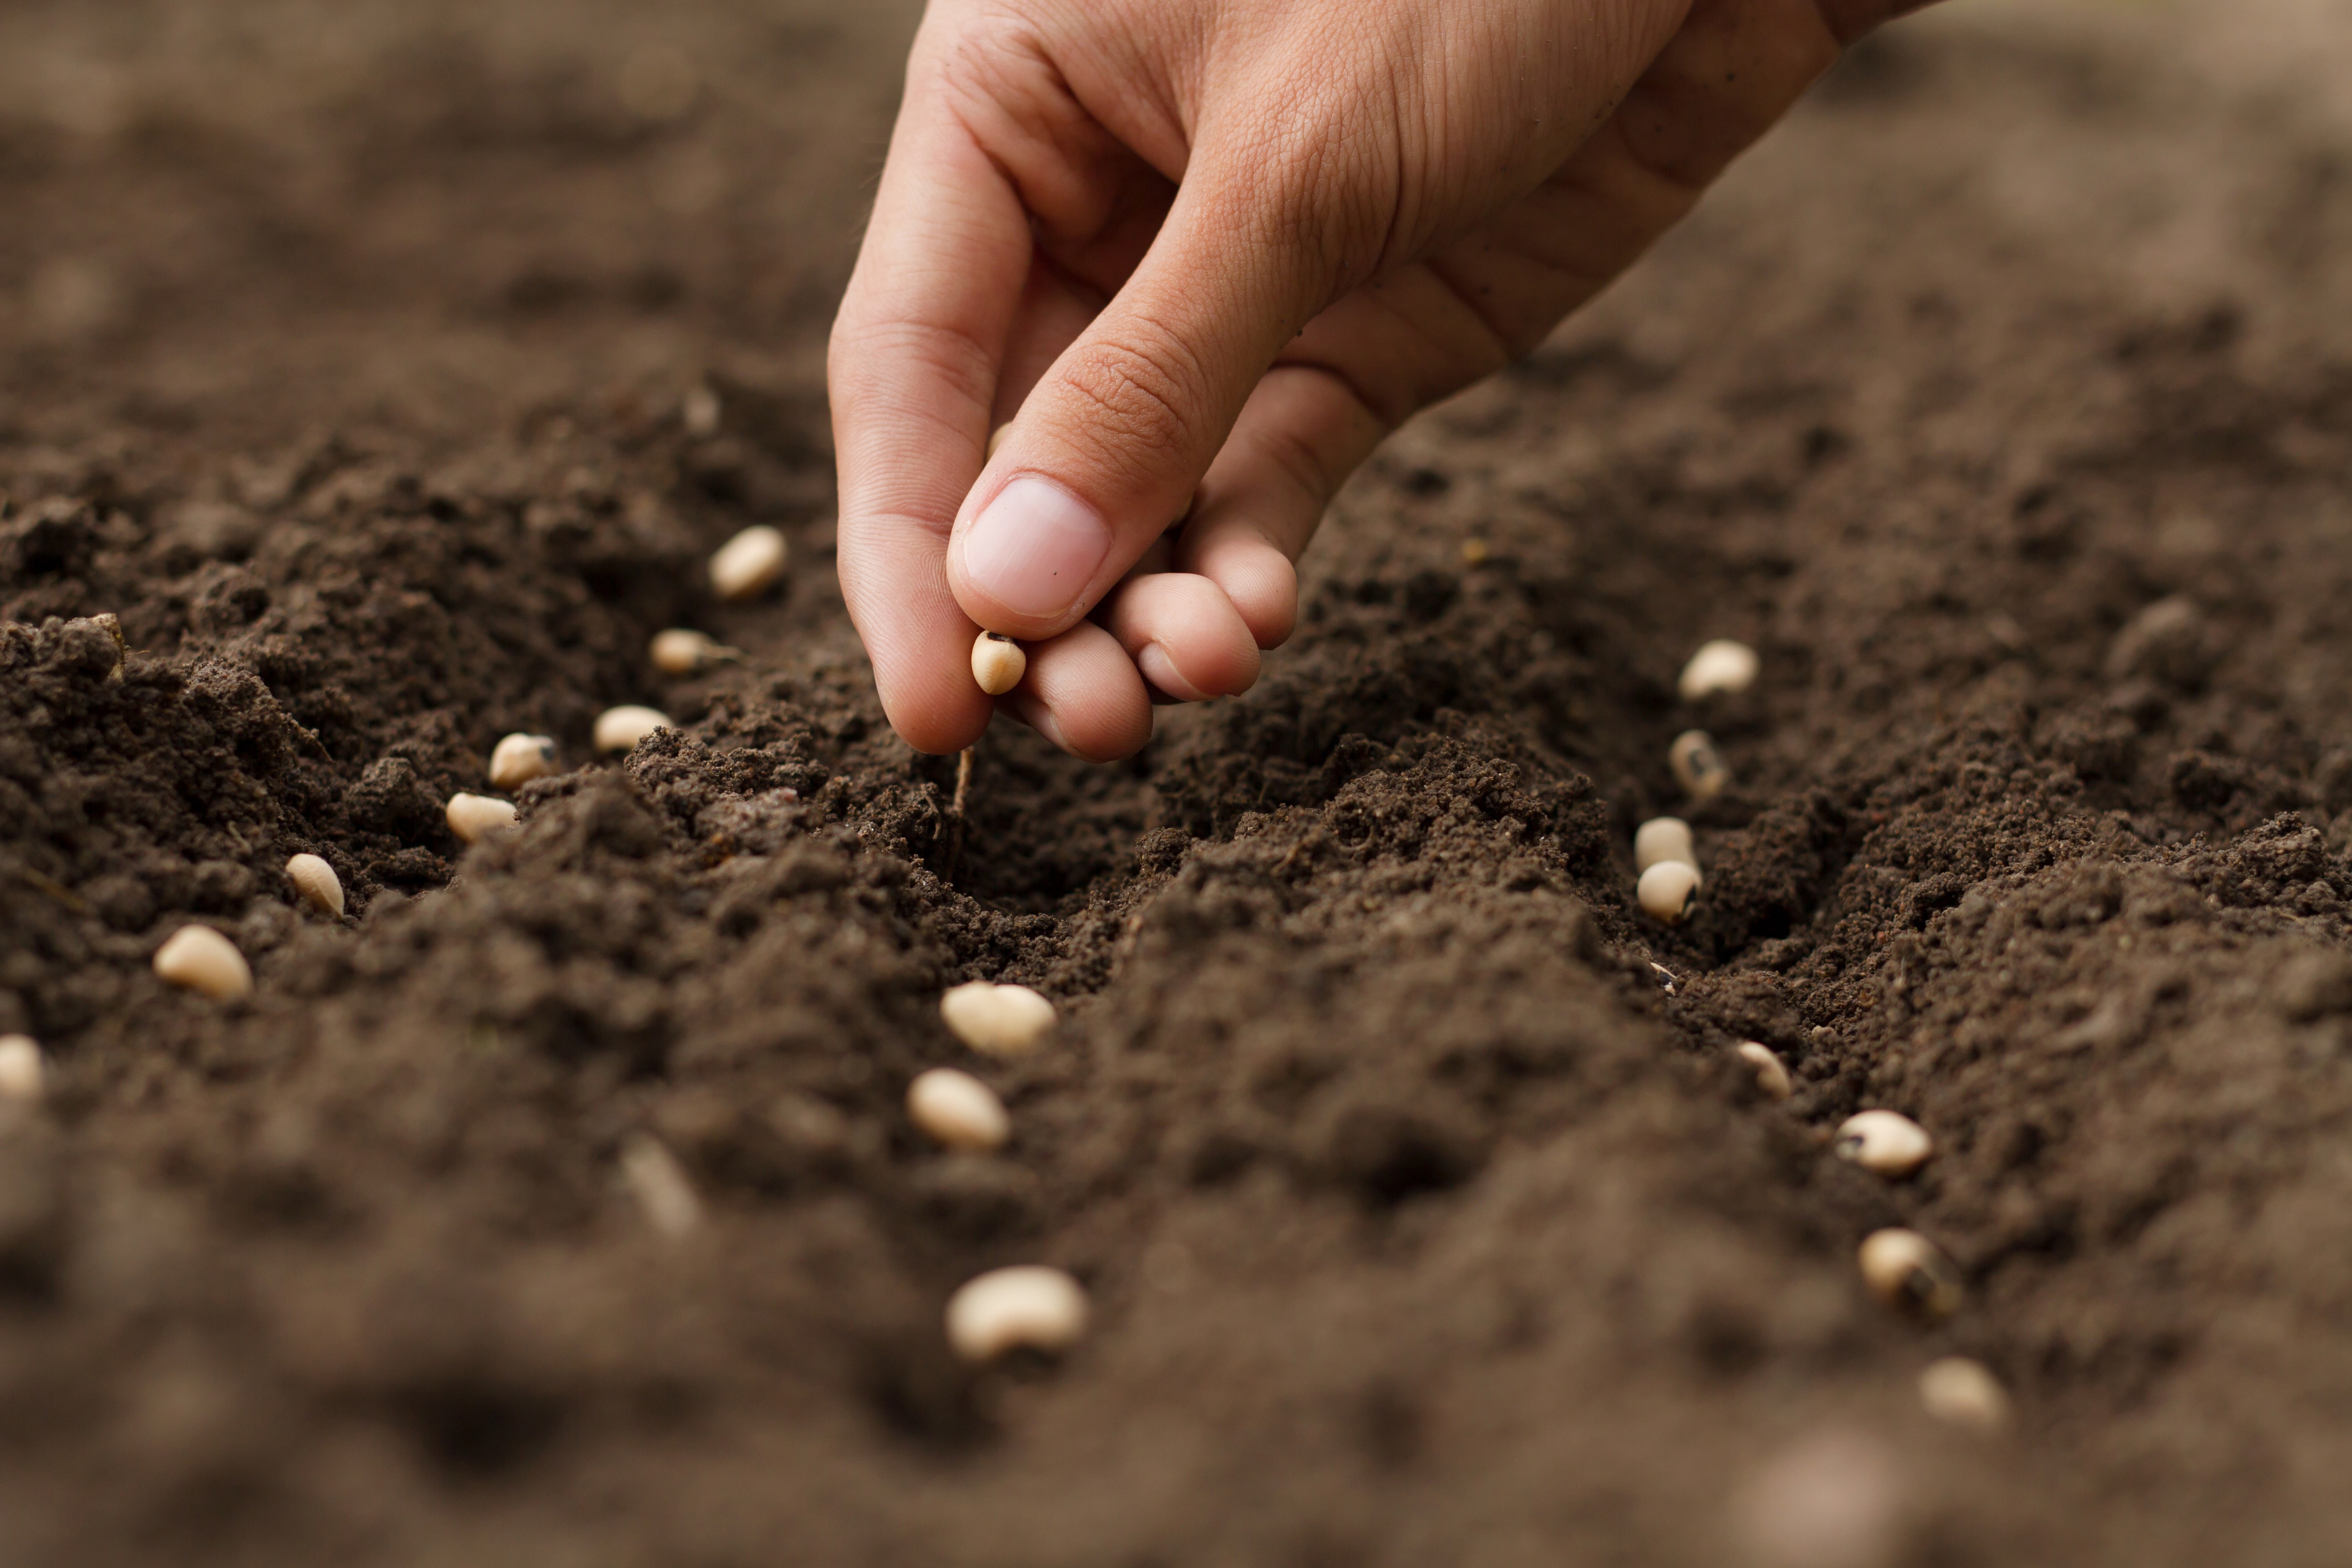 Hand growing seeds of vegetable on sowing soil at garden metaphor gardening, agriculture concept.